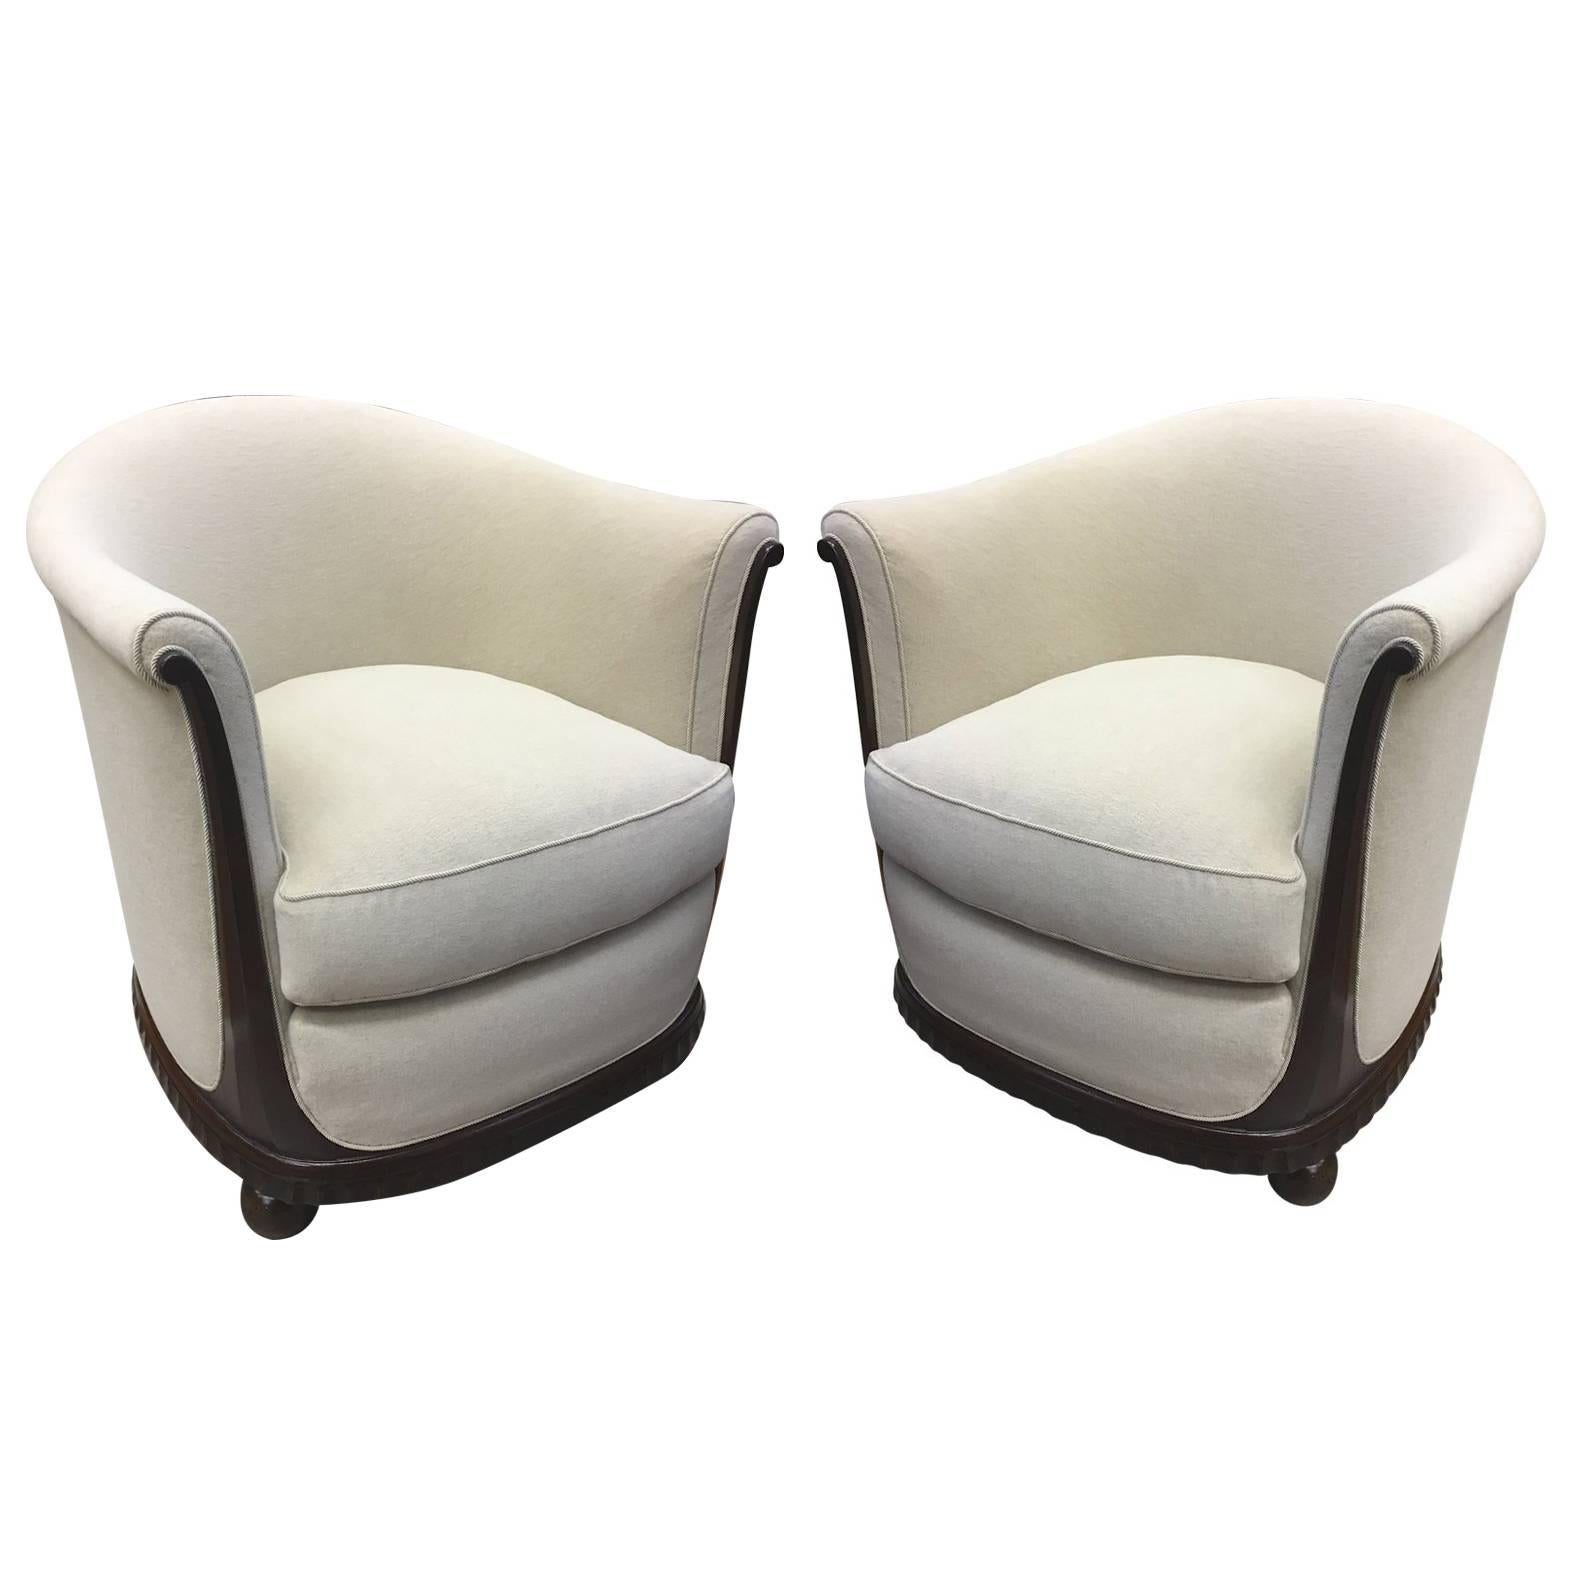 Jules Leleu Stamped Rarest Pair of Early Art Deco Chairs Newly Covered in Mohair For Sale